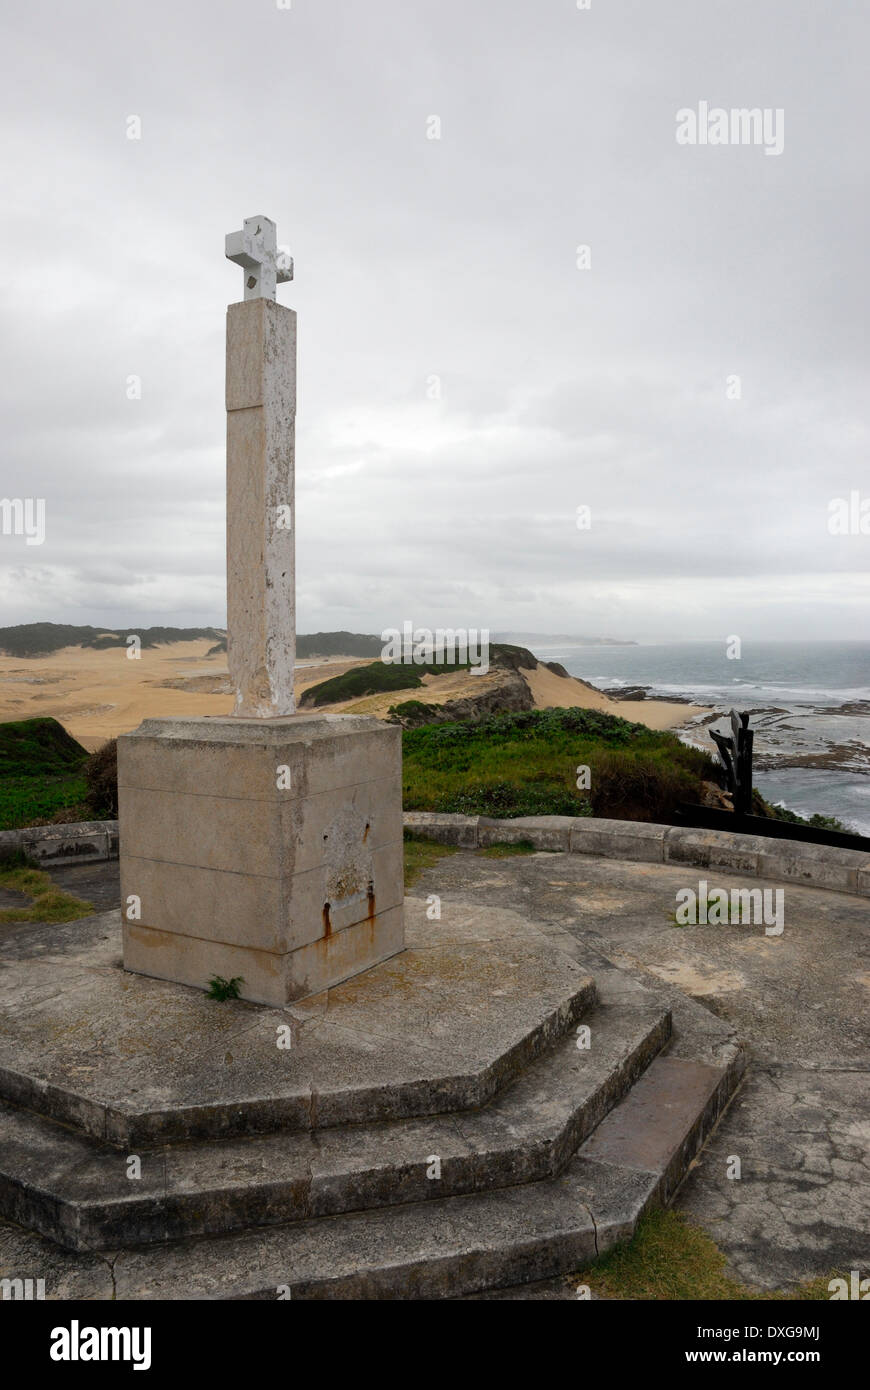 The Diaz Cross (replica) erected by Bartolomeu Dias in 1488, between Bushmans River mouth and Boknes, Eastern Cape, South Africa Stock Photo